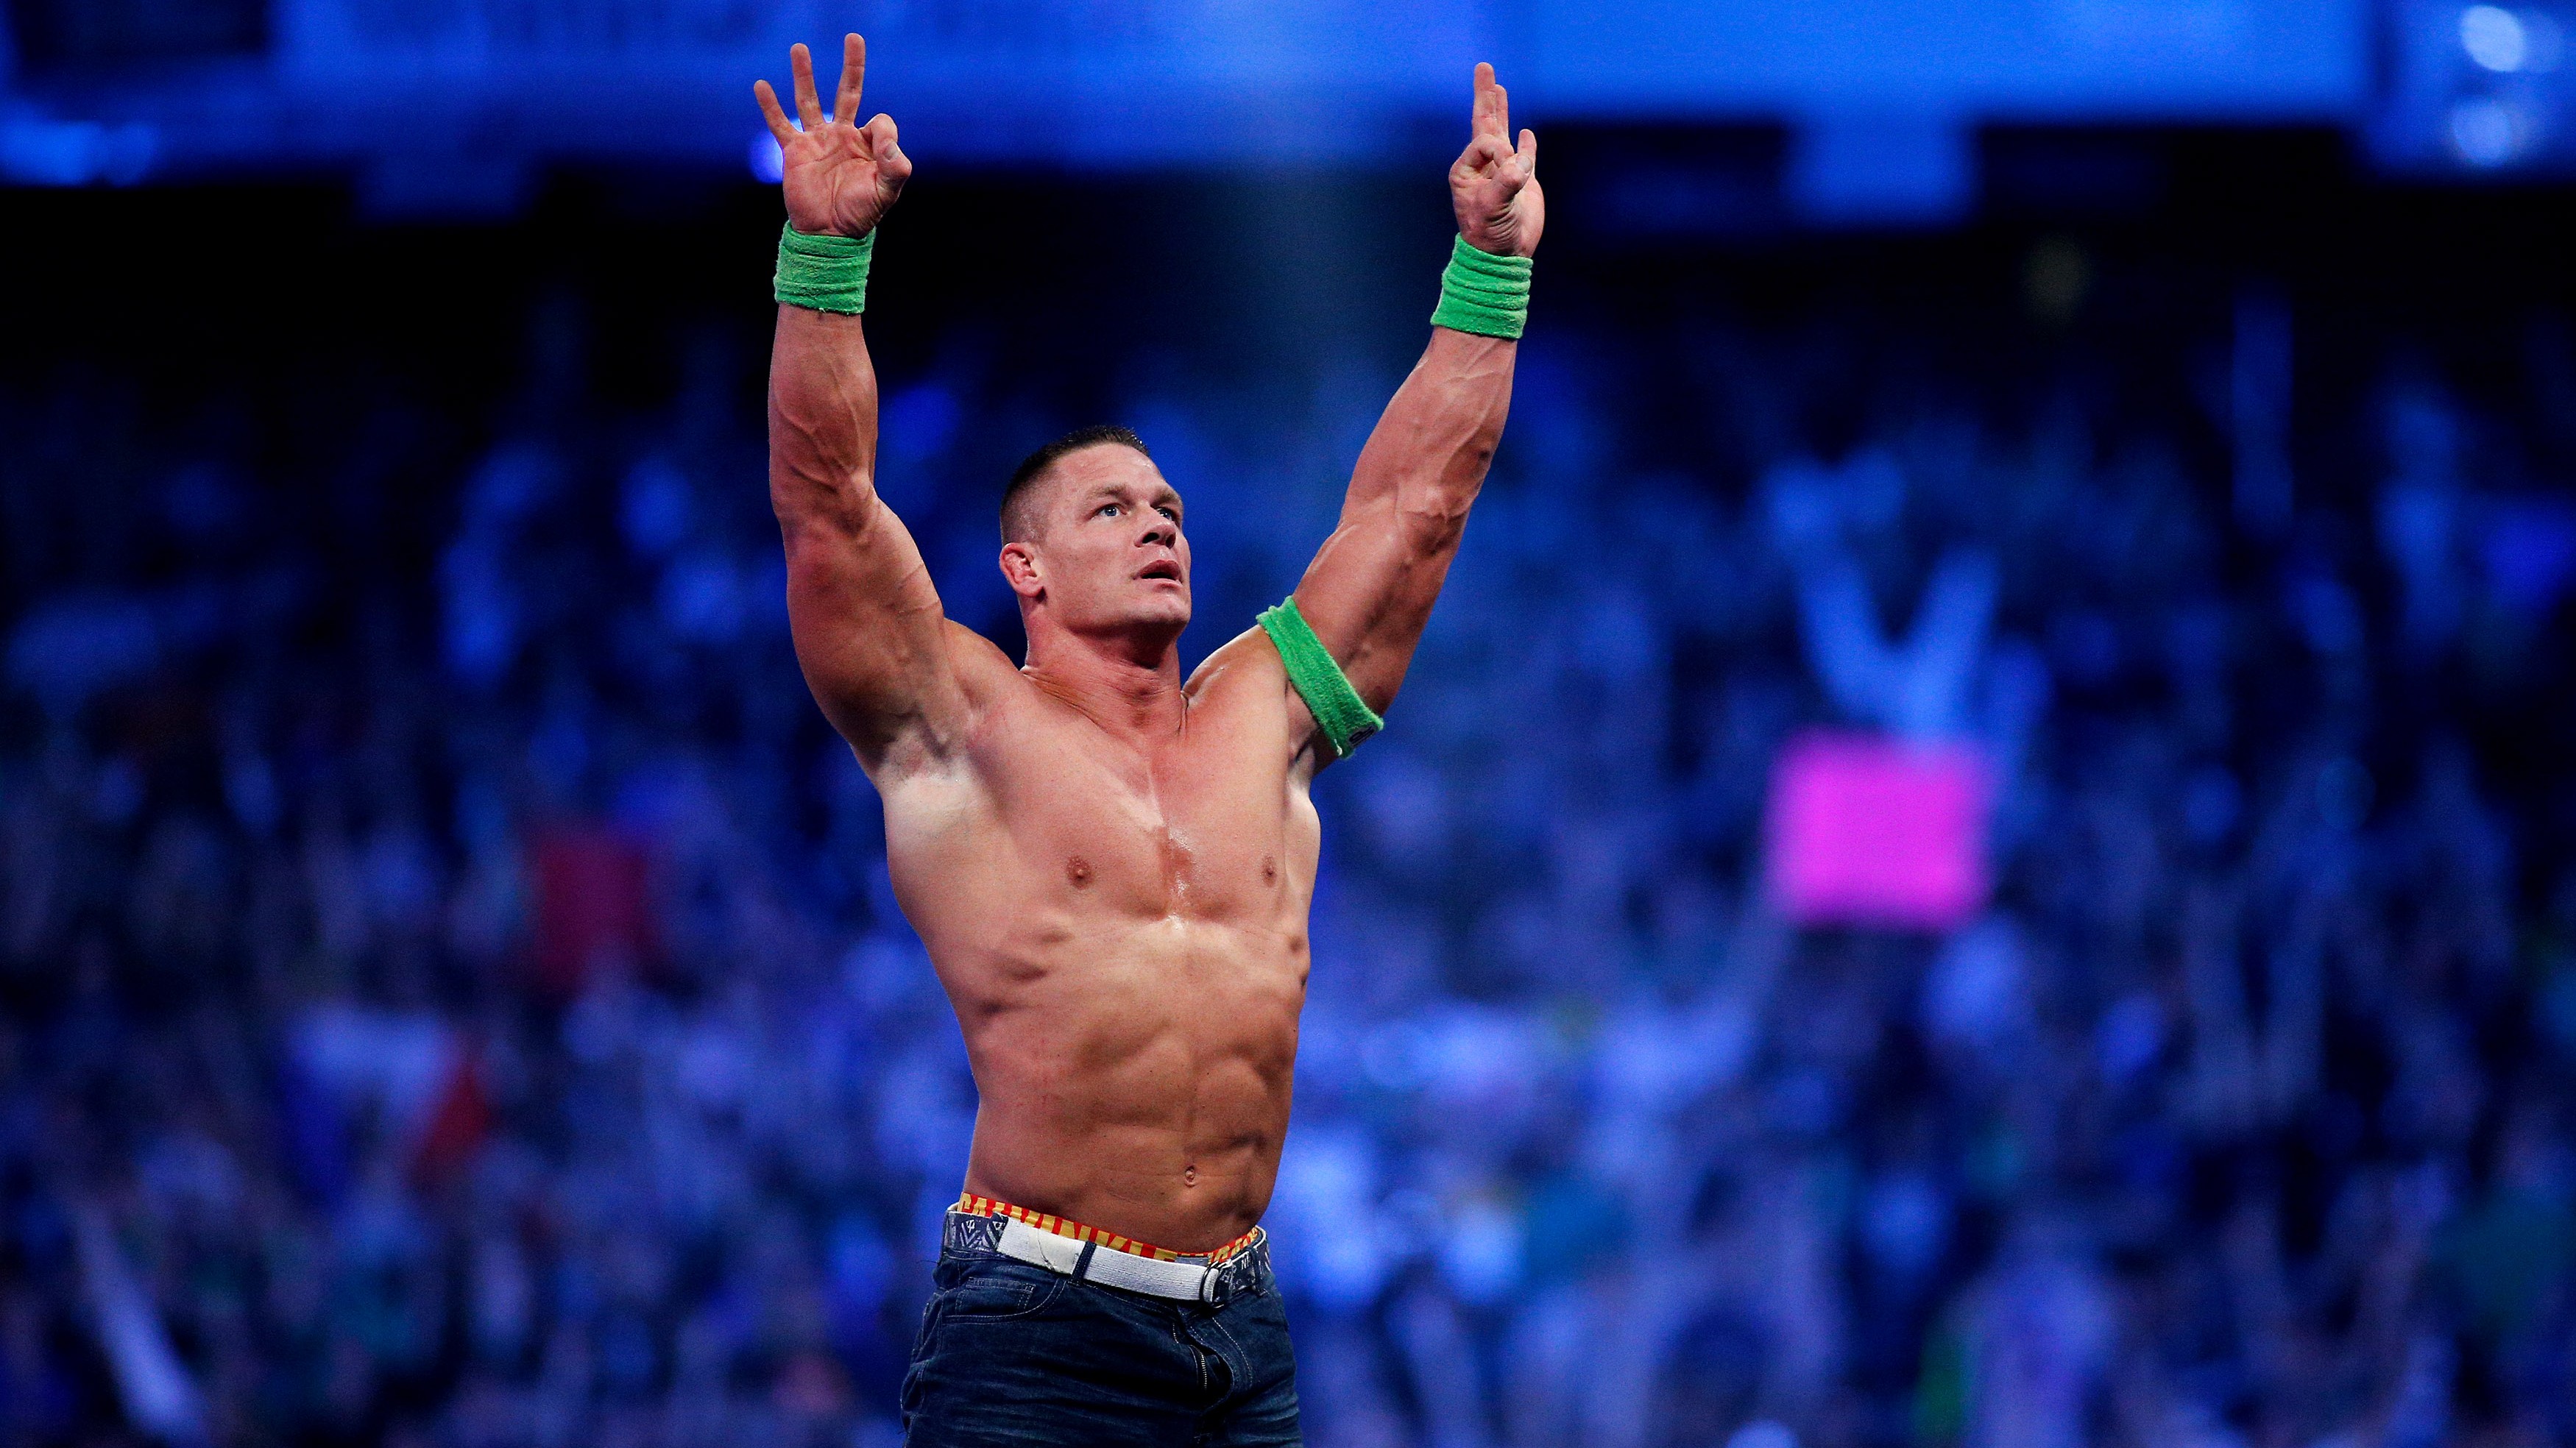 Is Making John Cena Wwe Champion What S Really Best For Business